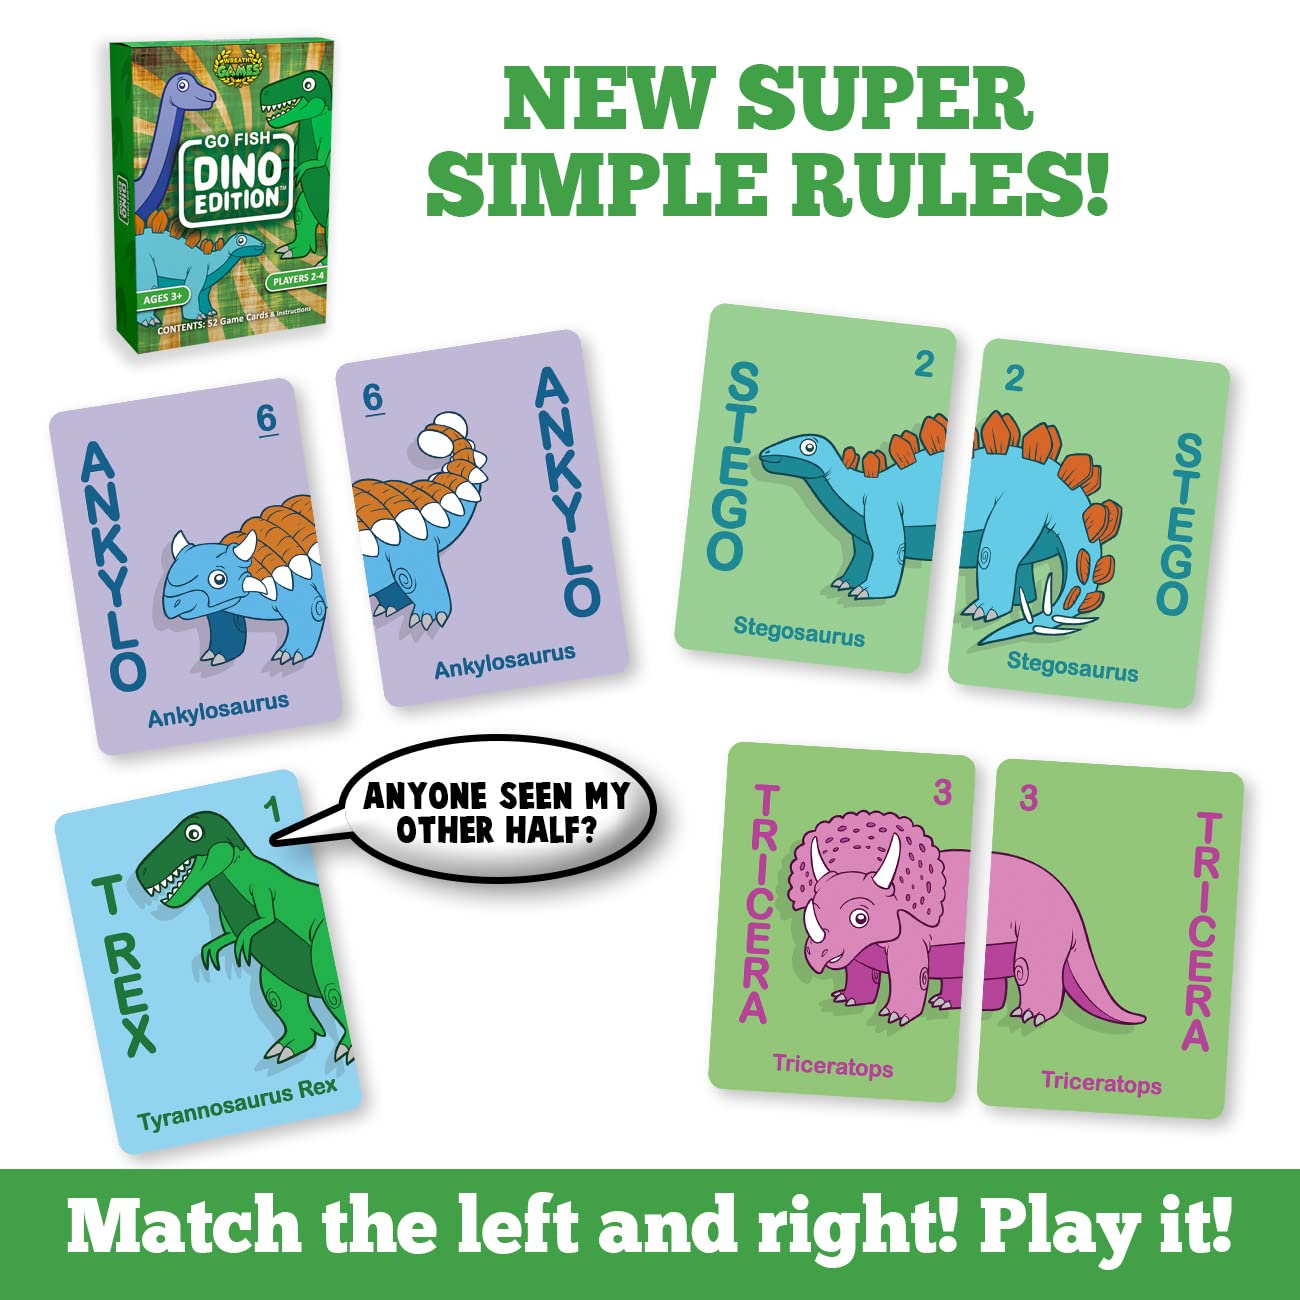 Wreathy Games - Go Fish - Dino Edition Card Game - Ages 3 and up